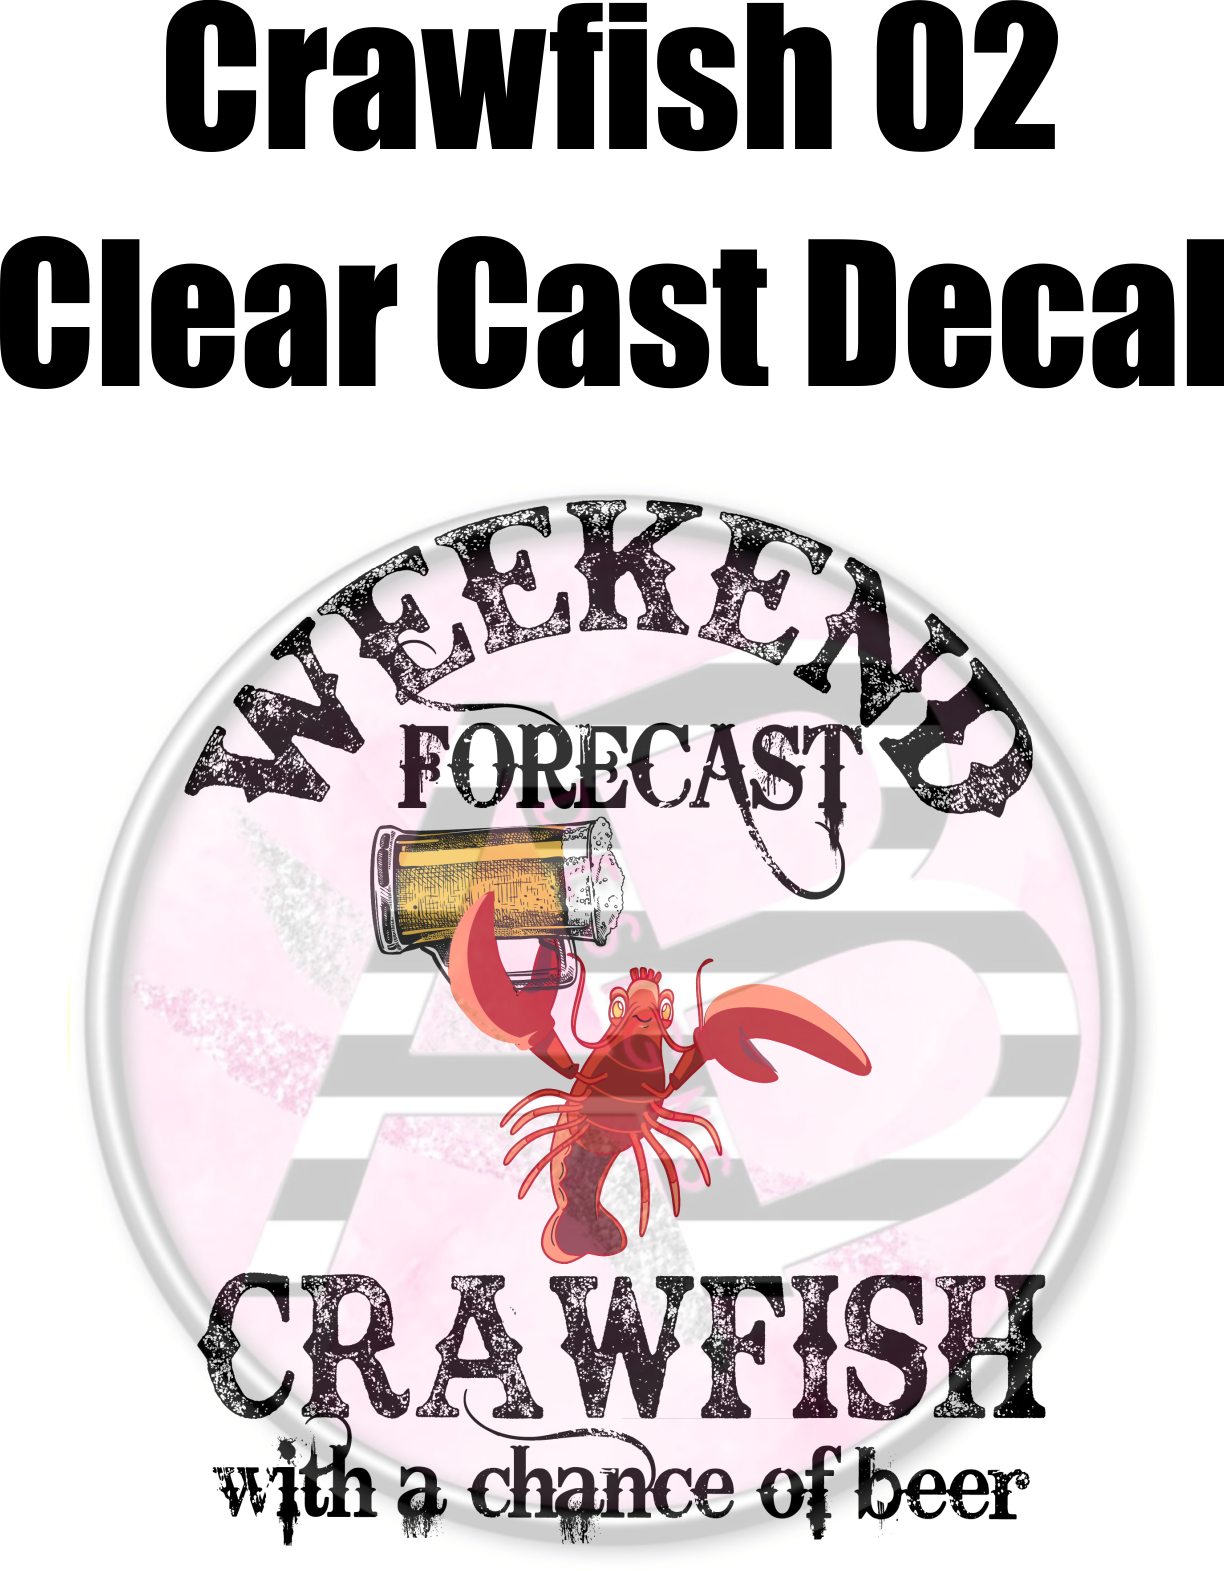 Crawfish 02 - Clear Cast Decal - 60